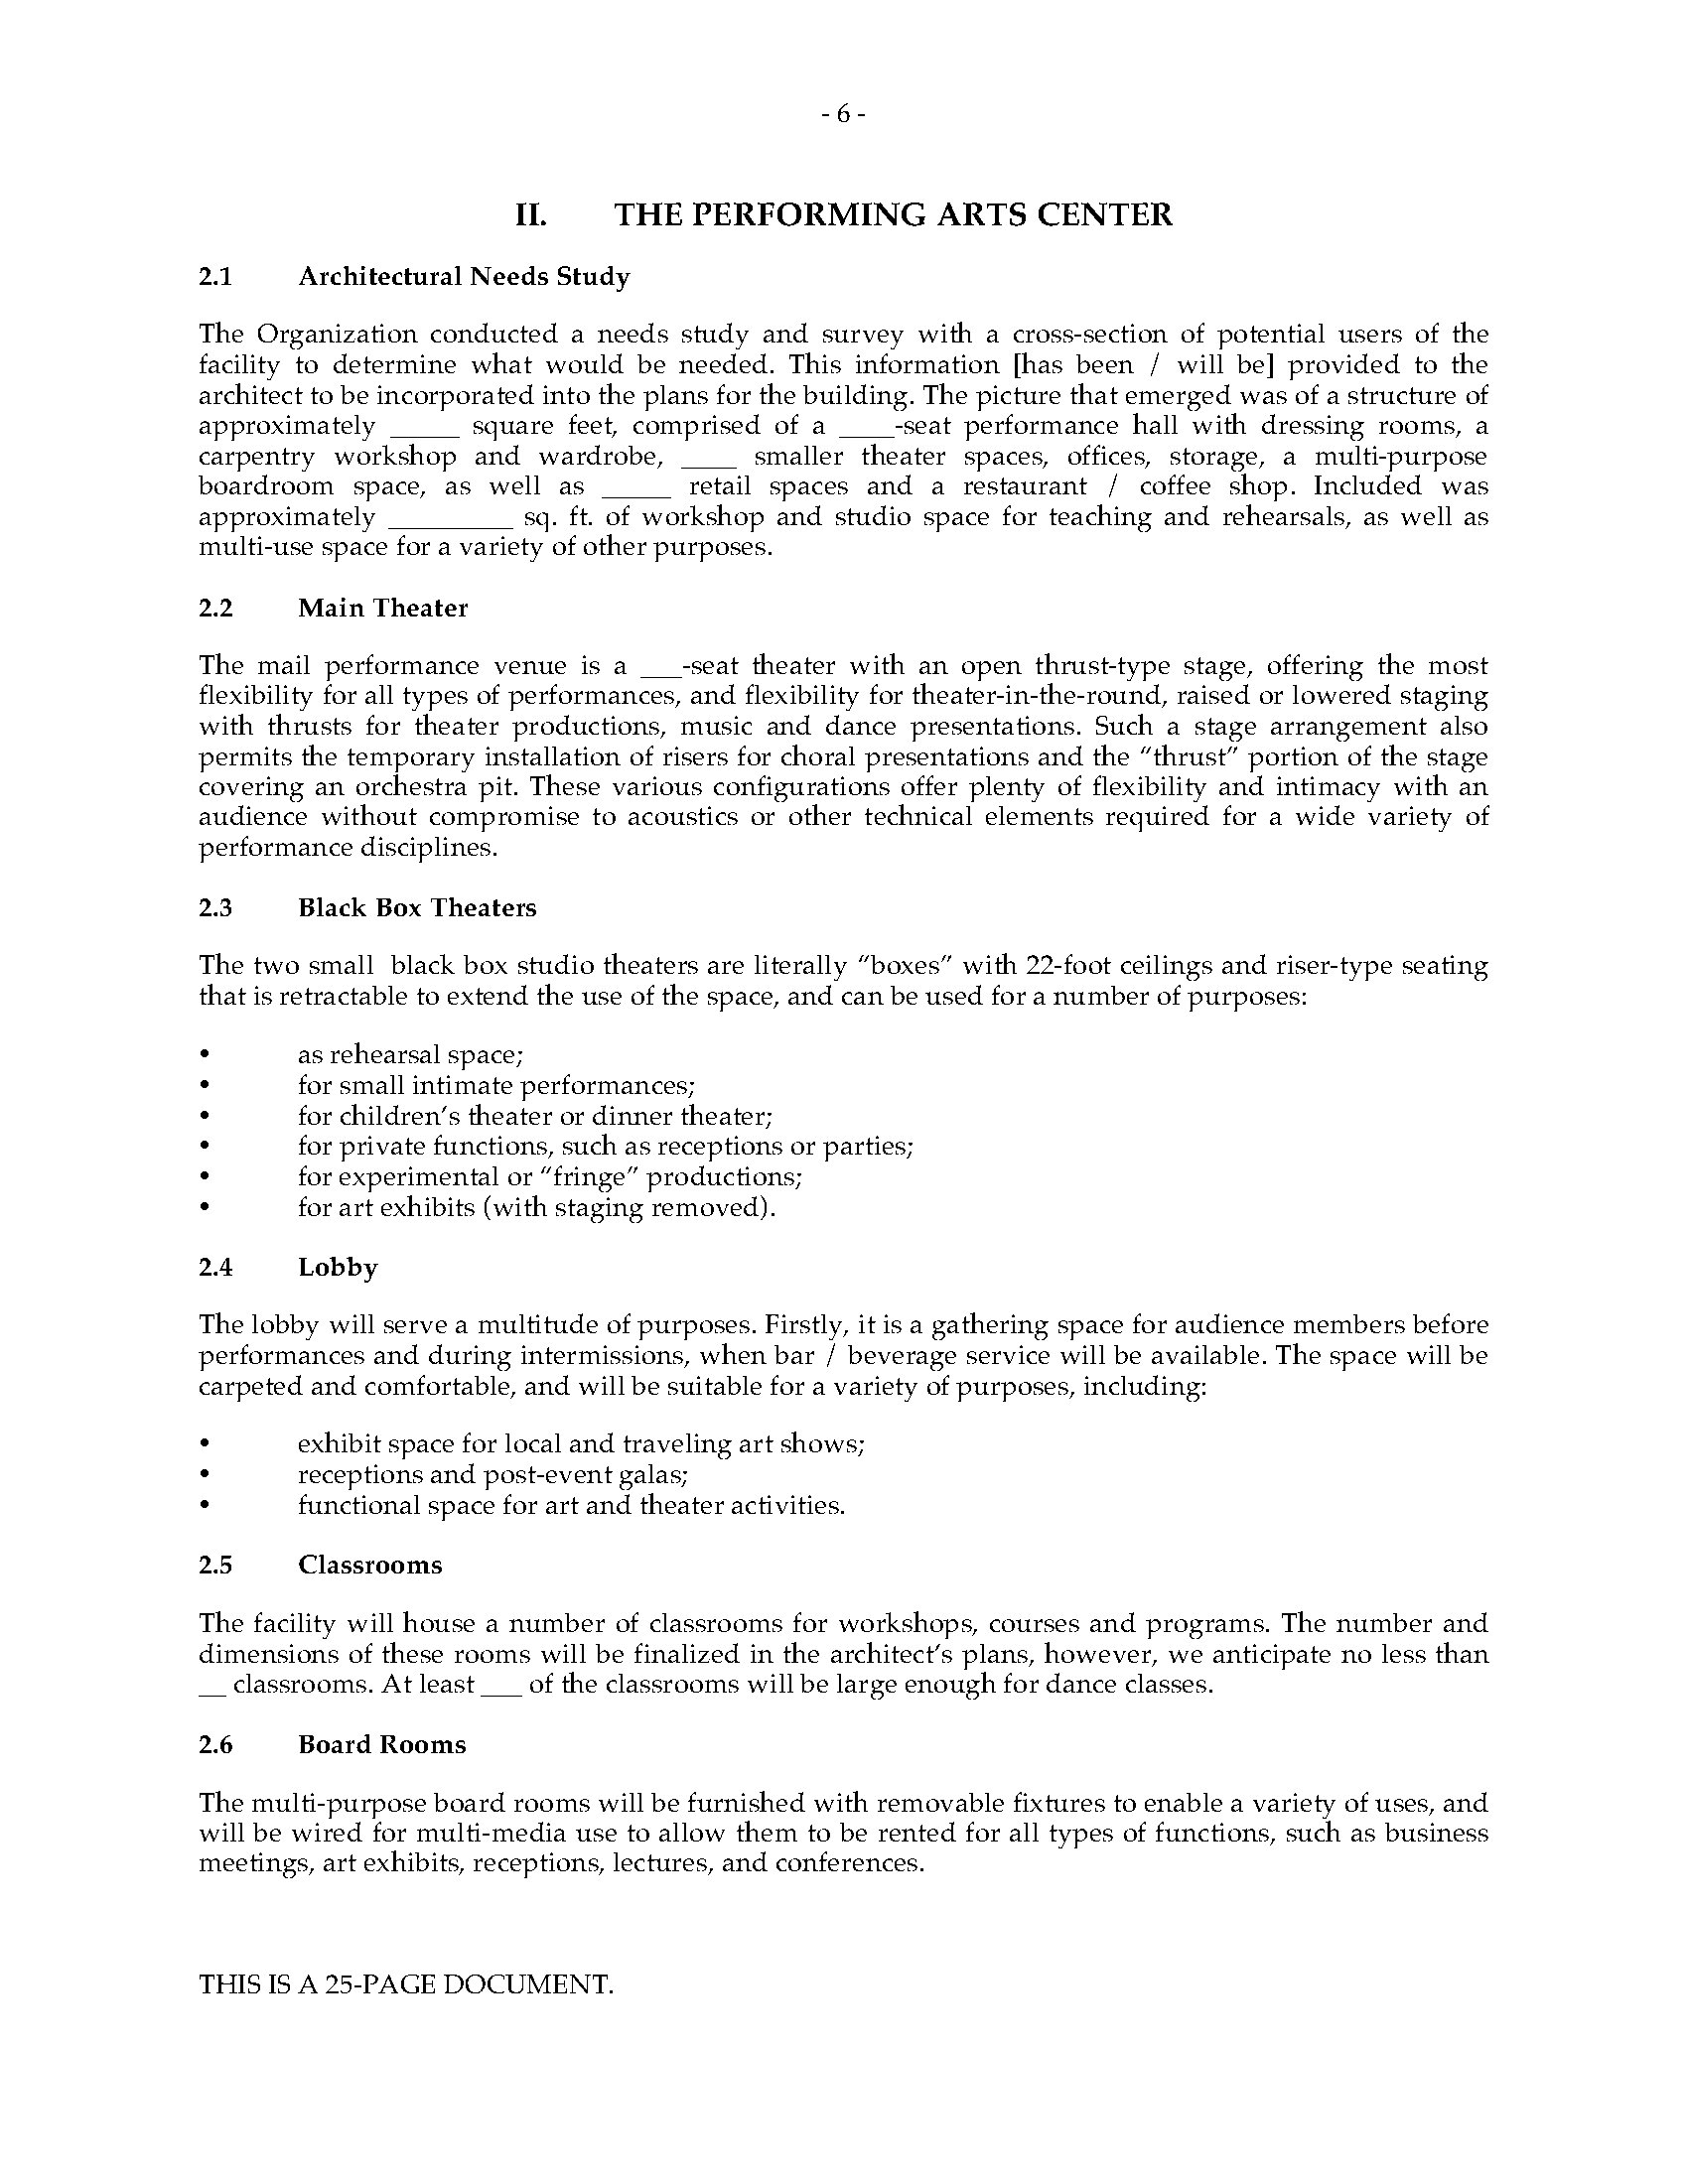 performing arts business plan template